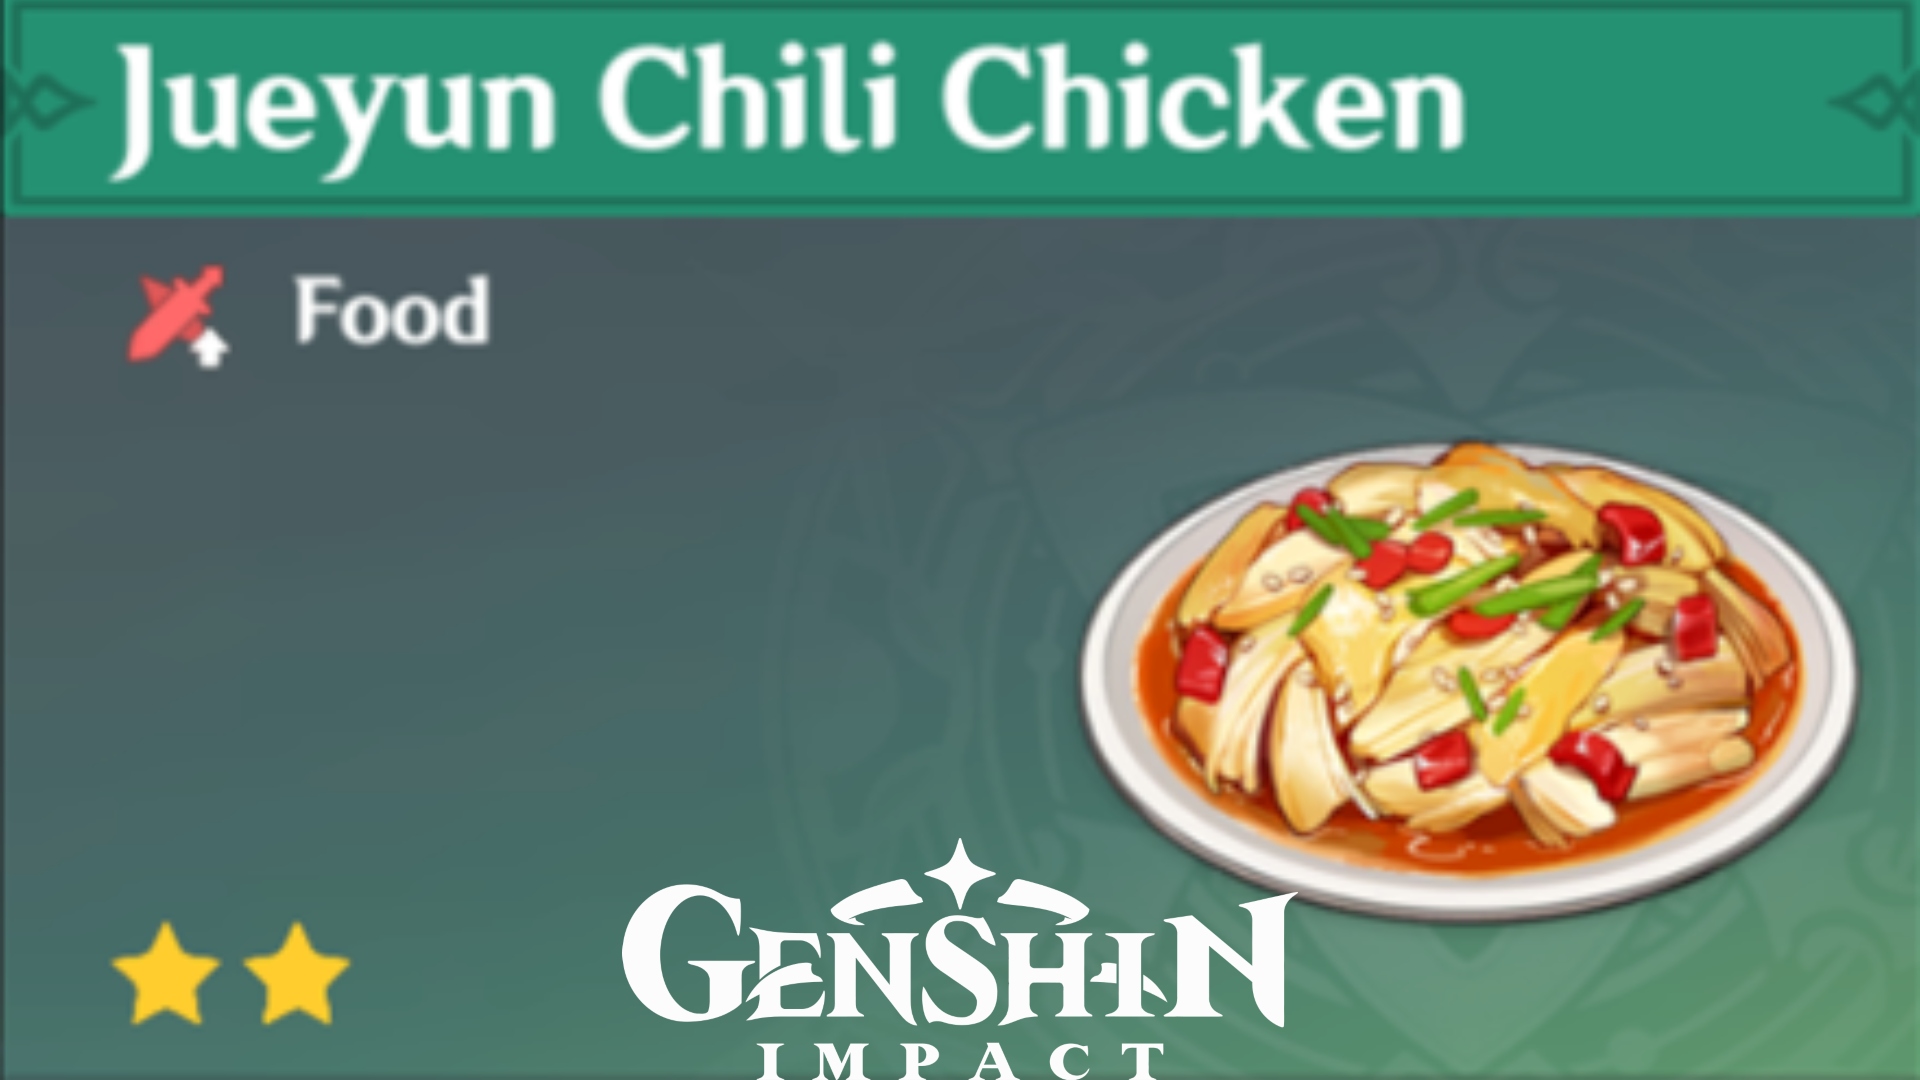 You are currently viewing Jueyun Chili Chicken Genshin Impact Location